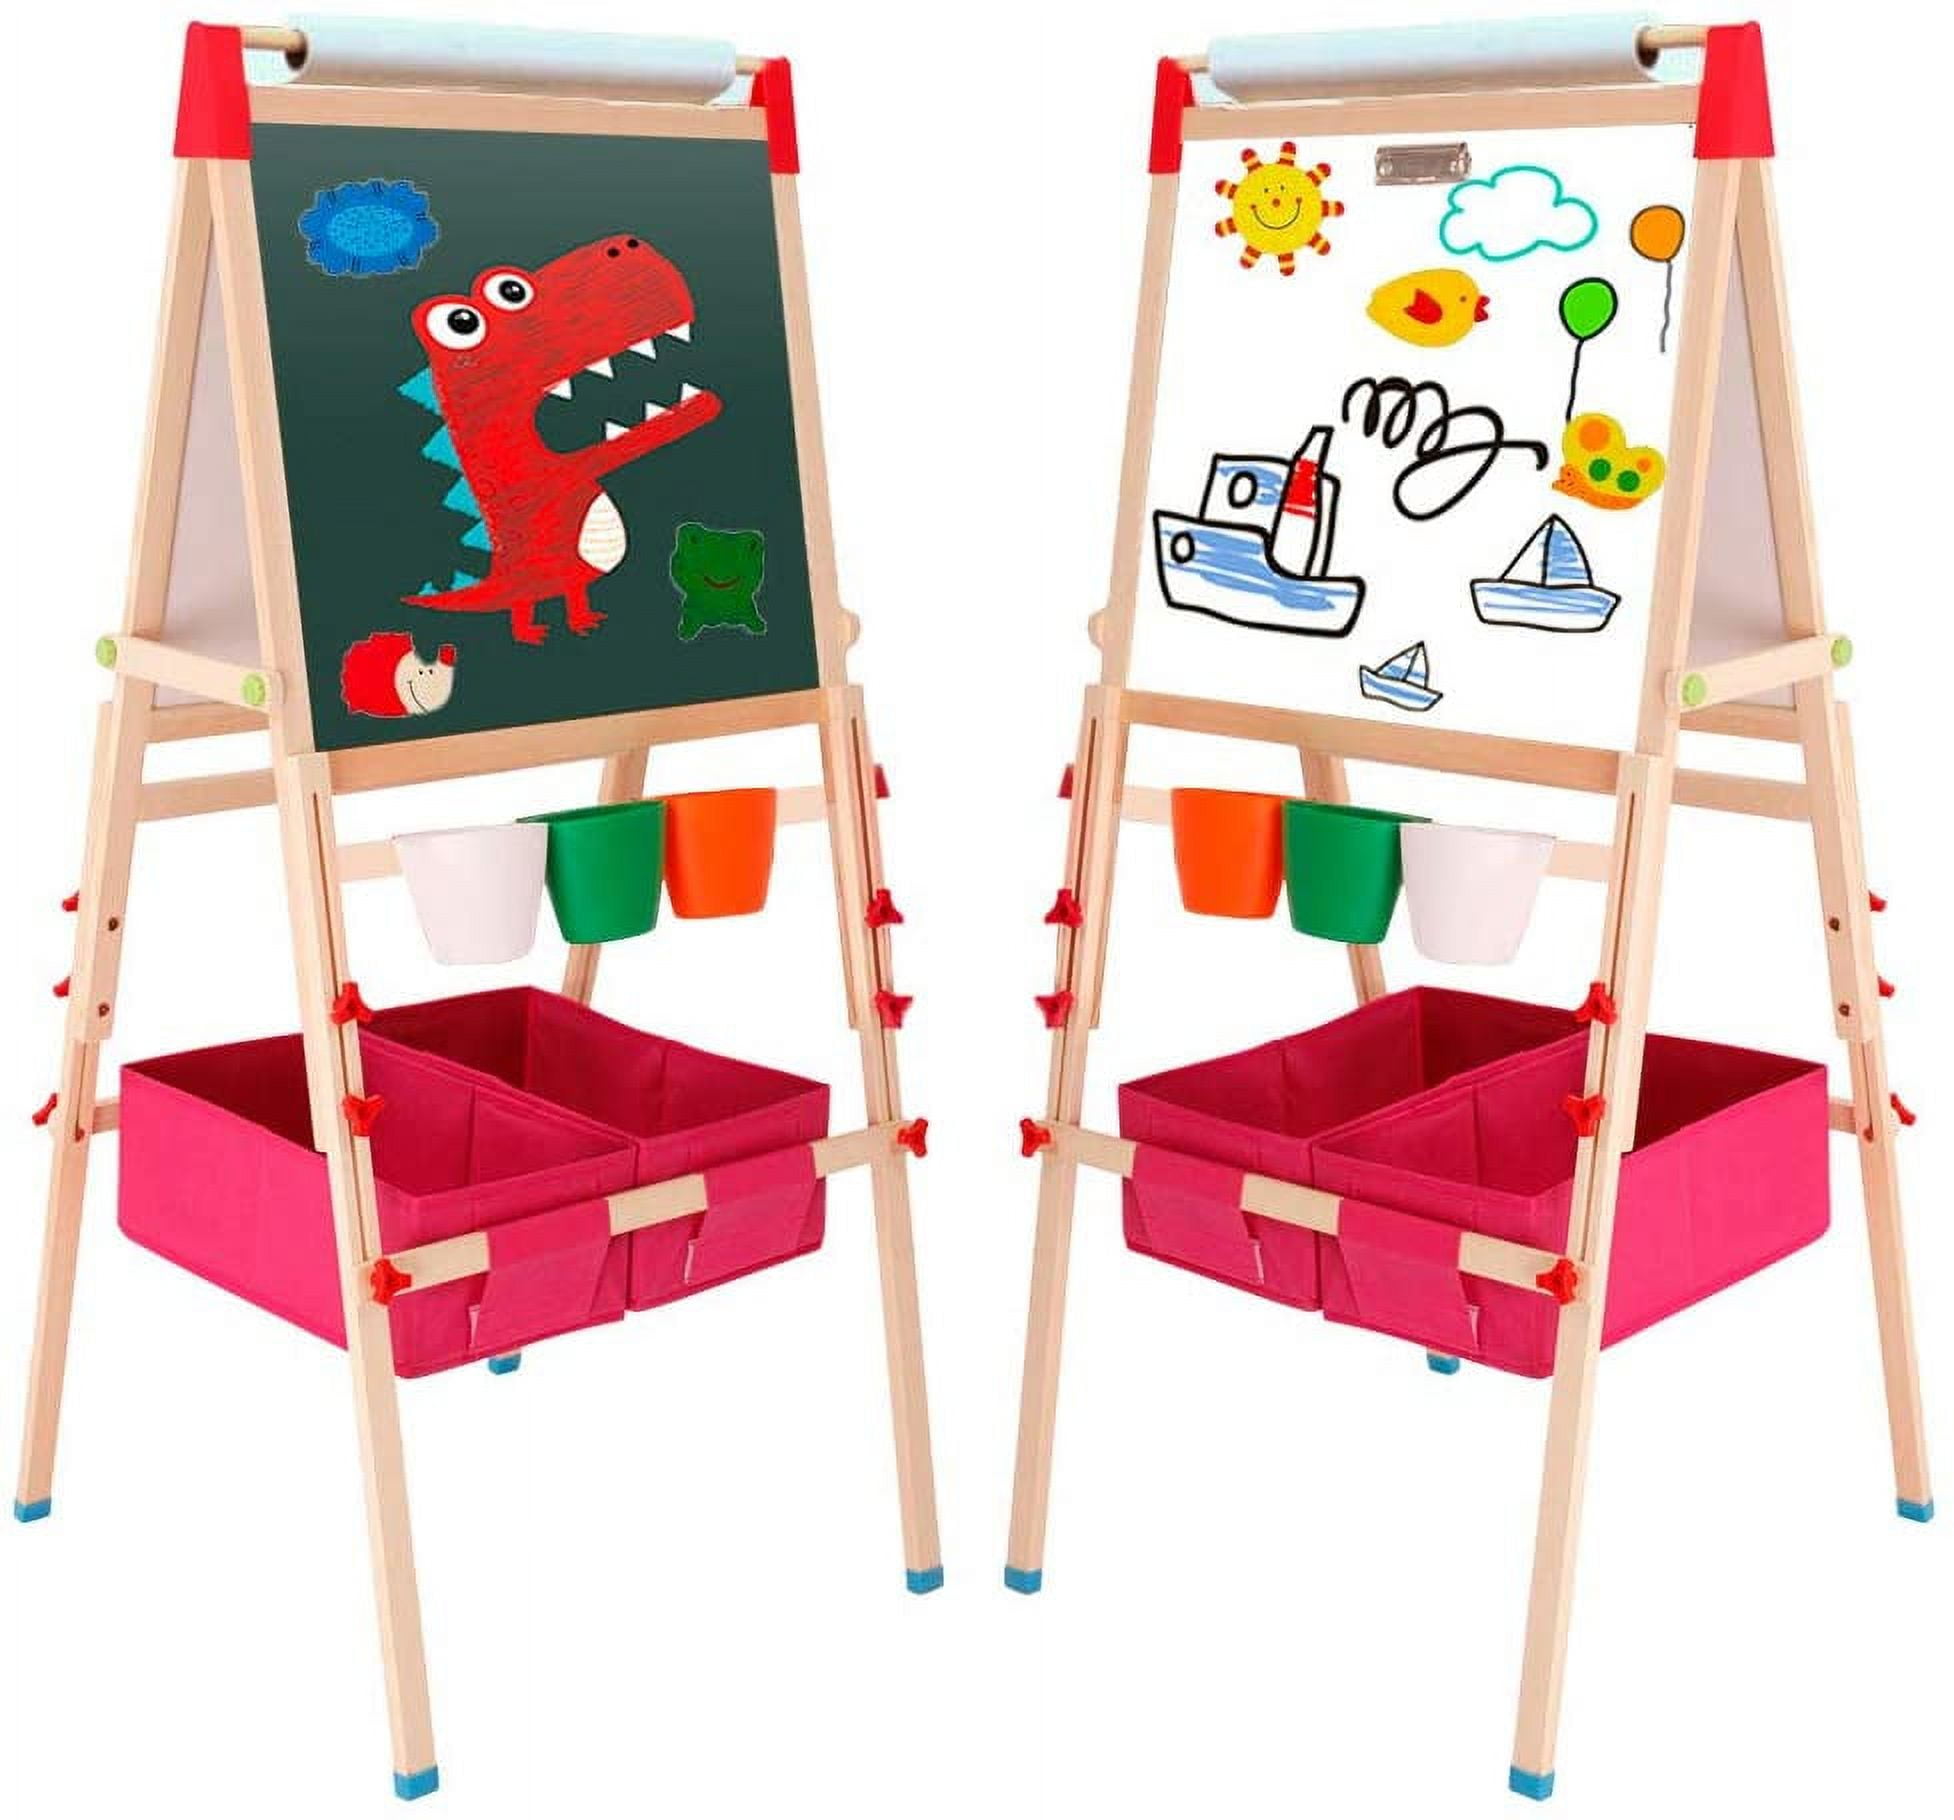 Ealing Baby Art Easel for Kids , 3-in-1, Dry-Erase Board - Chalkboard - Paper Roll - Red Color